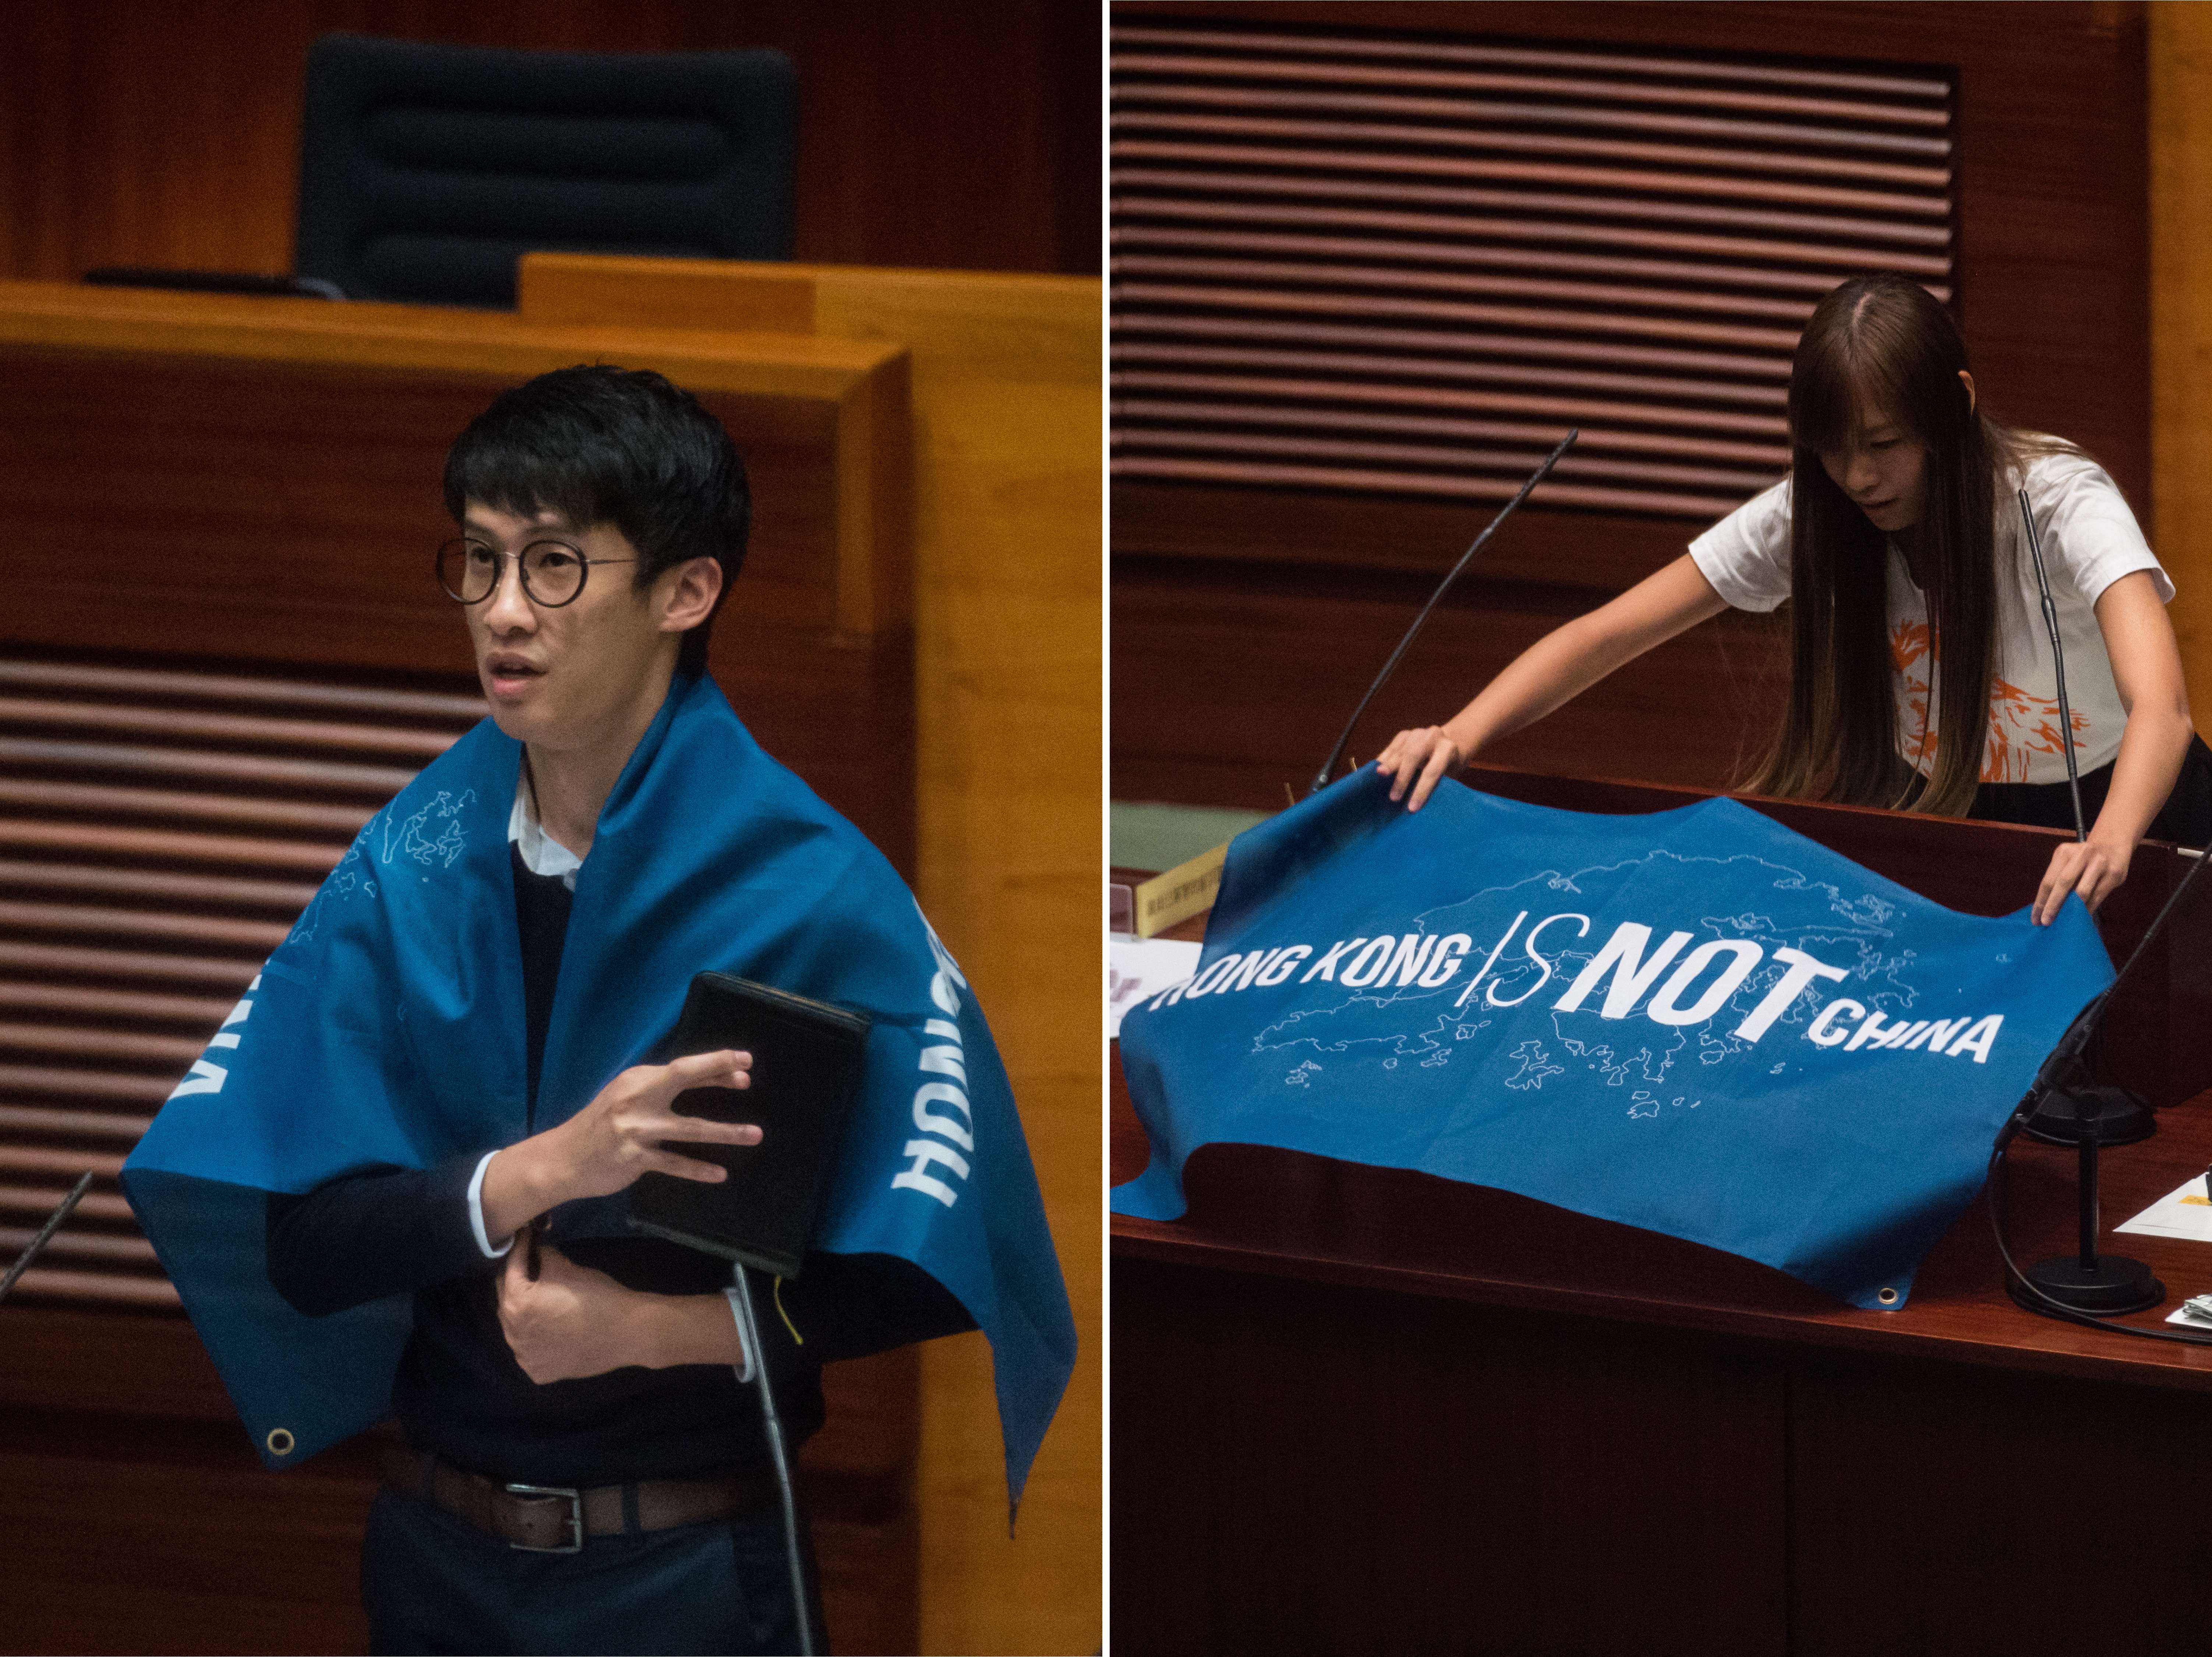 Newly-elected lawmakers Sixtus Baggio Leung and Yau Wai-ching unfurl flags that read "Hong Kong is not China" as they take their Legislative Council oaths. Their actions caused some of their supporters to disavow them. Photo: AFP